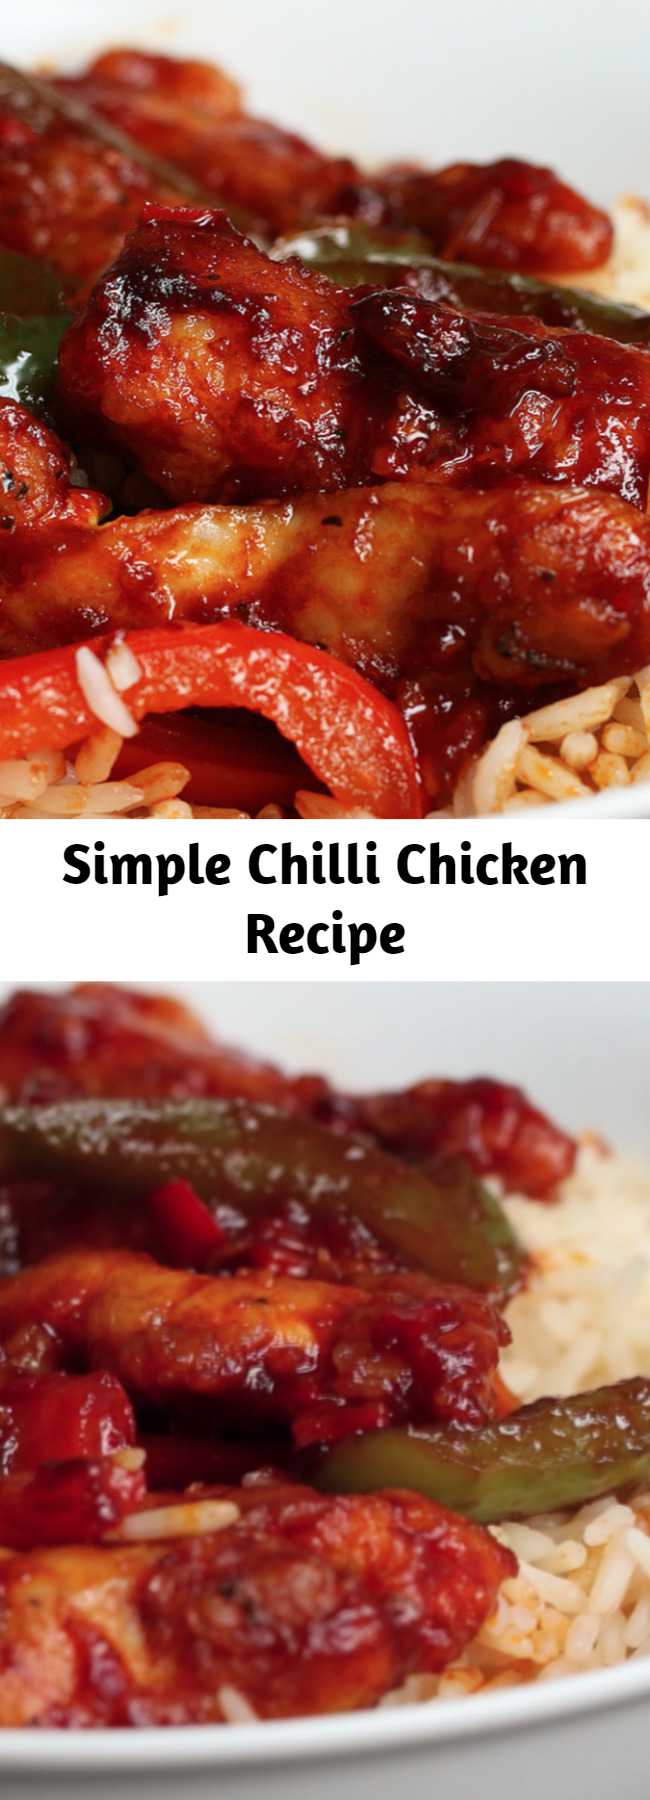 Simple Chilli Chicken Recipe - Nicer than takeaway Chinese, so good especially with sweet chilli sauce.